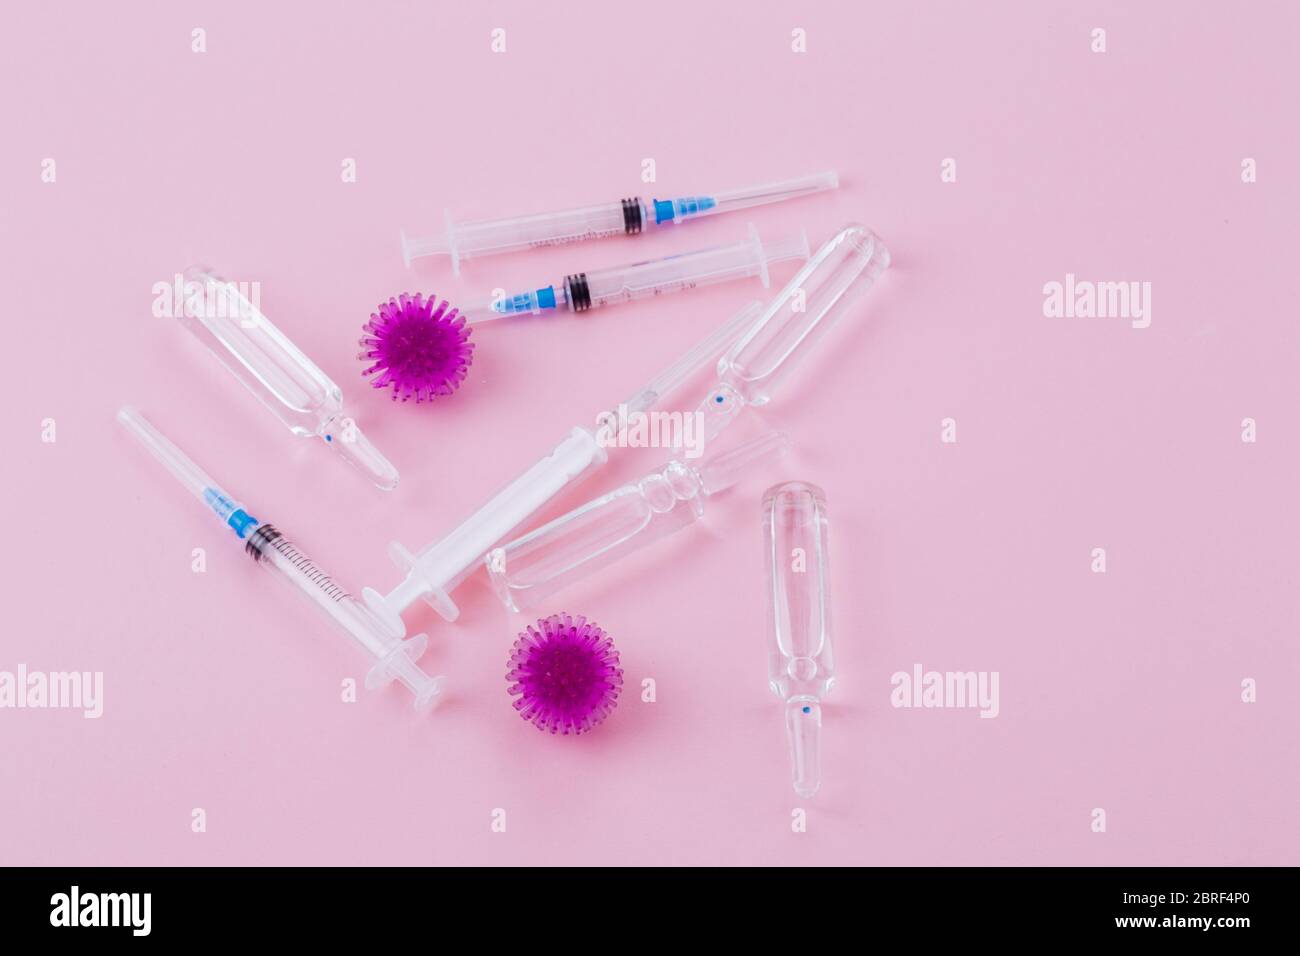 Abstract model of coronavirus infection of the strain Coronavirus.Purple virus, syringe and ampoules with medicine on a pink background, poses a pandemic hazard. Stock Photo